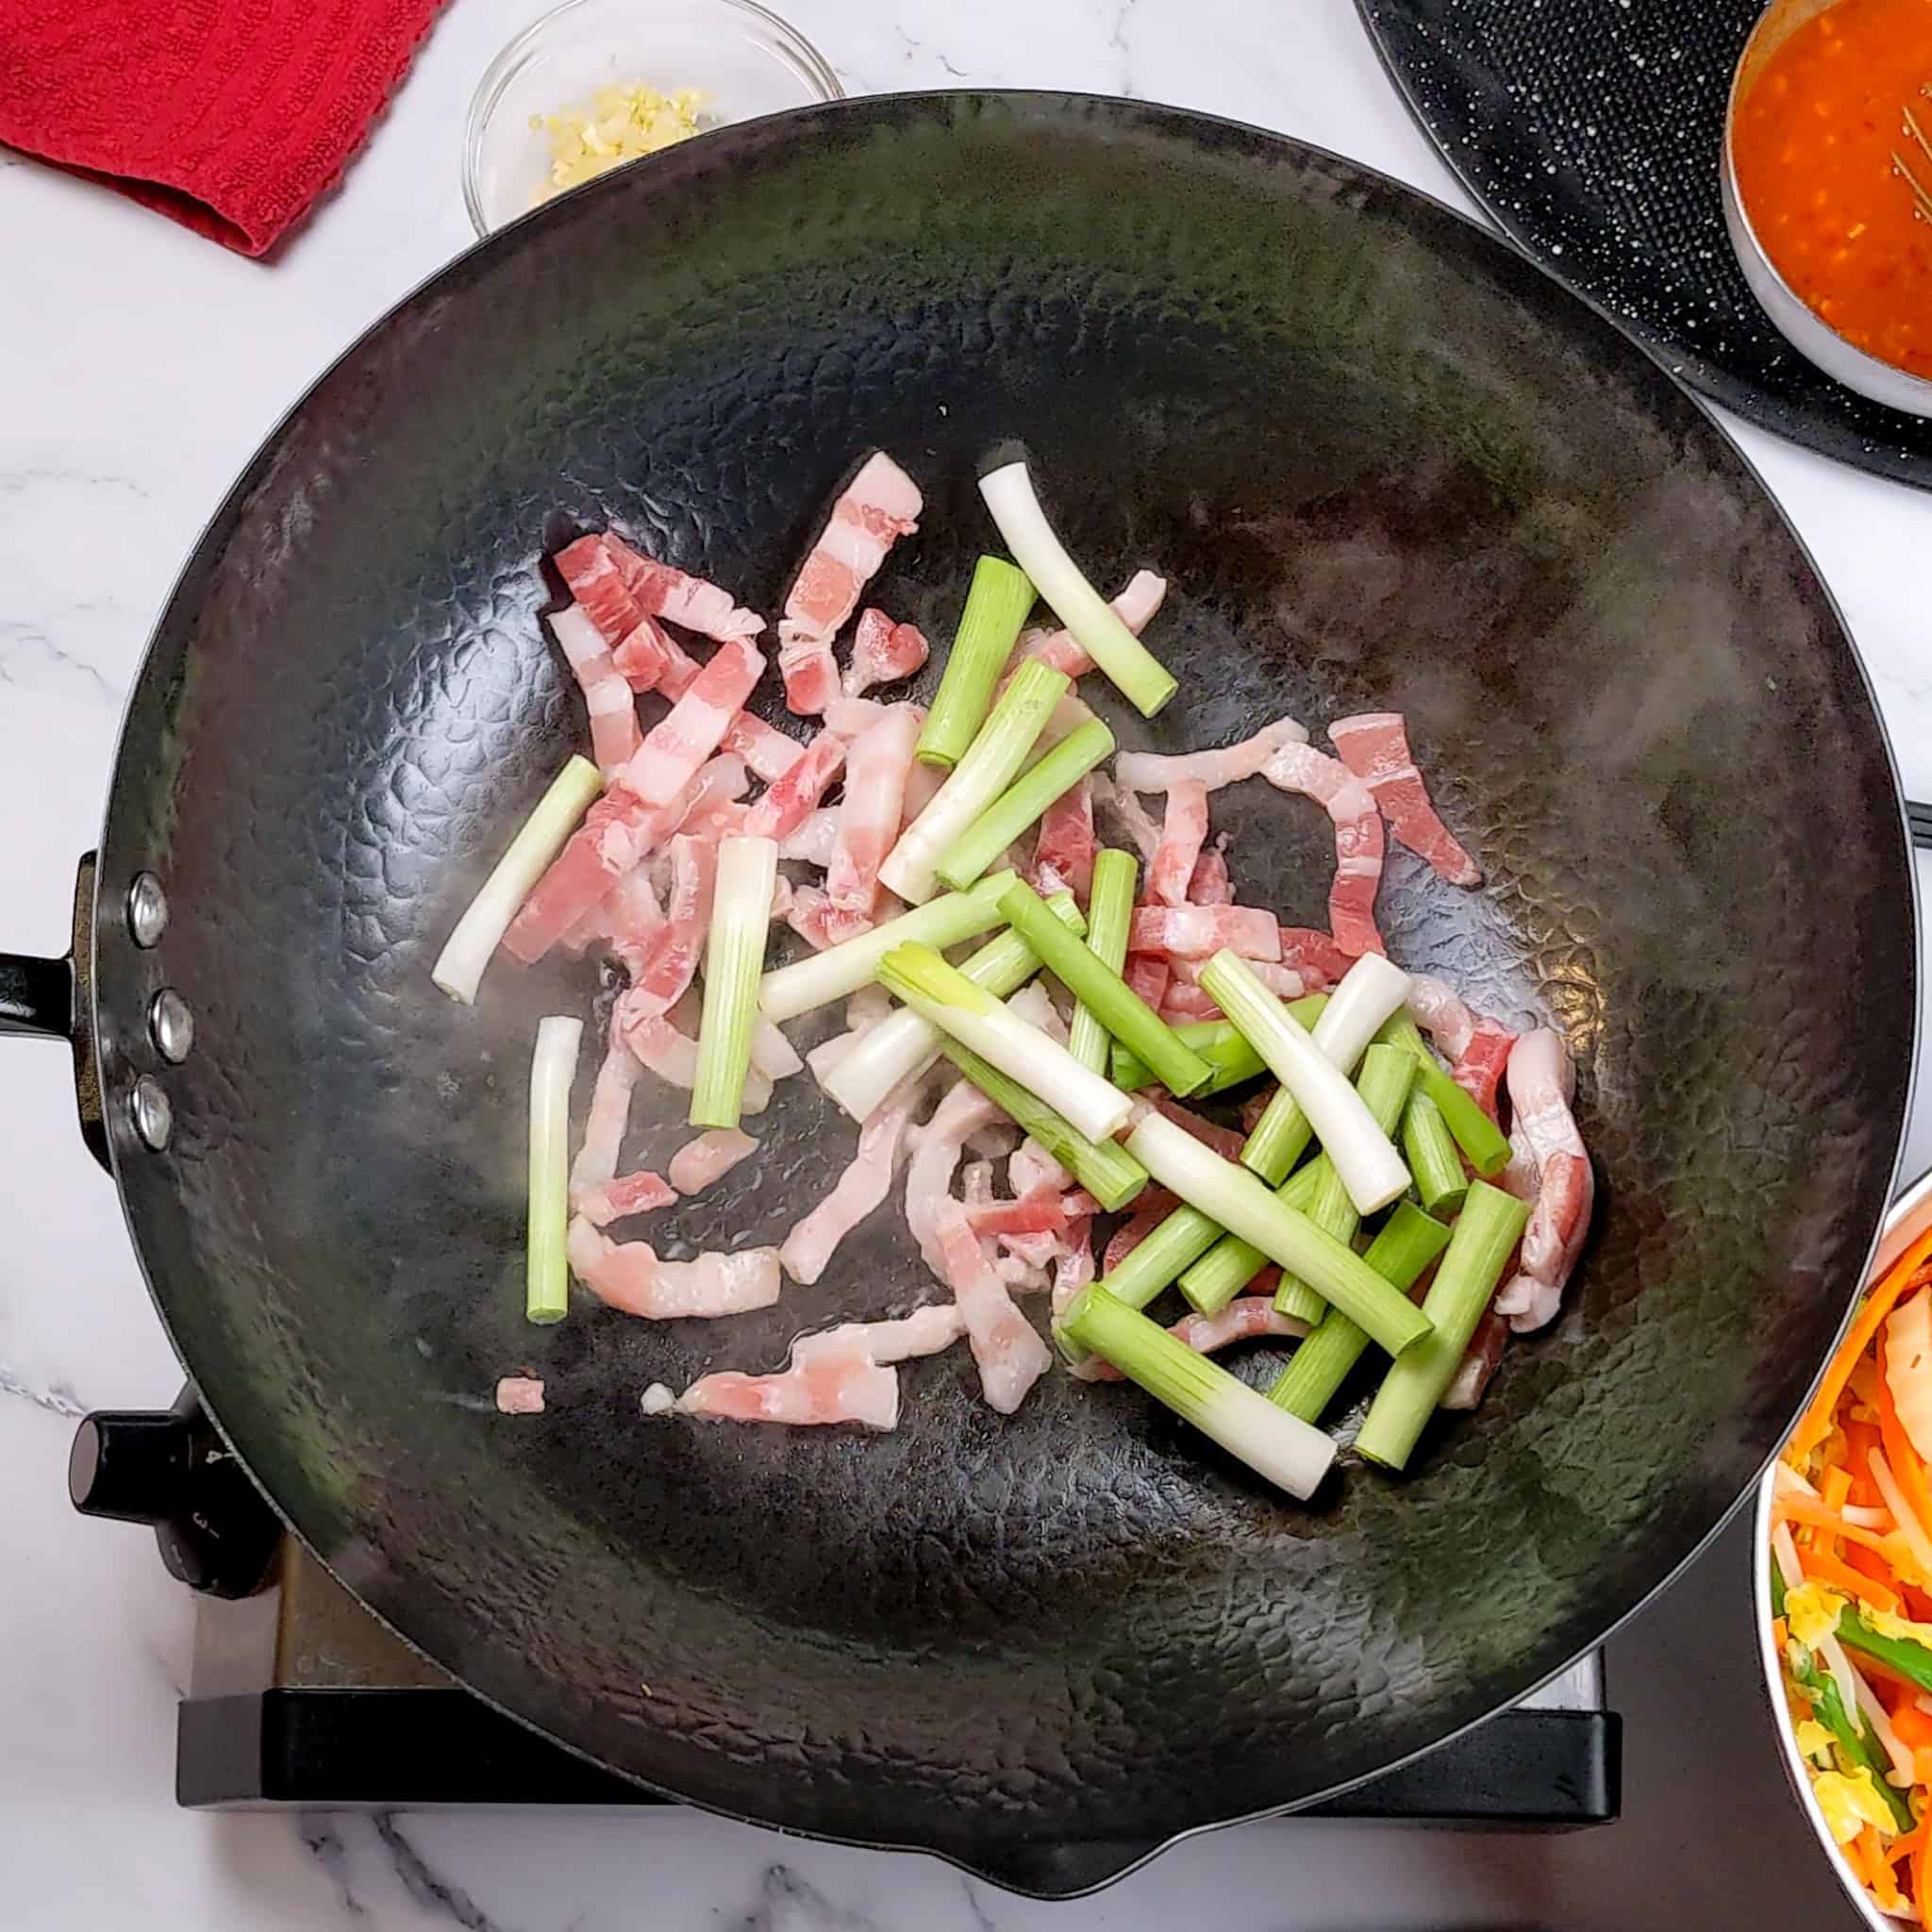 1-inch scallions and thin strips of pork belly stir-frying in a wok.